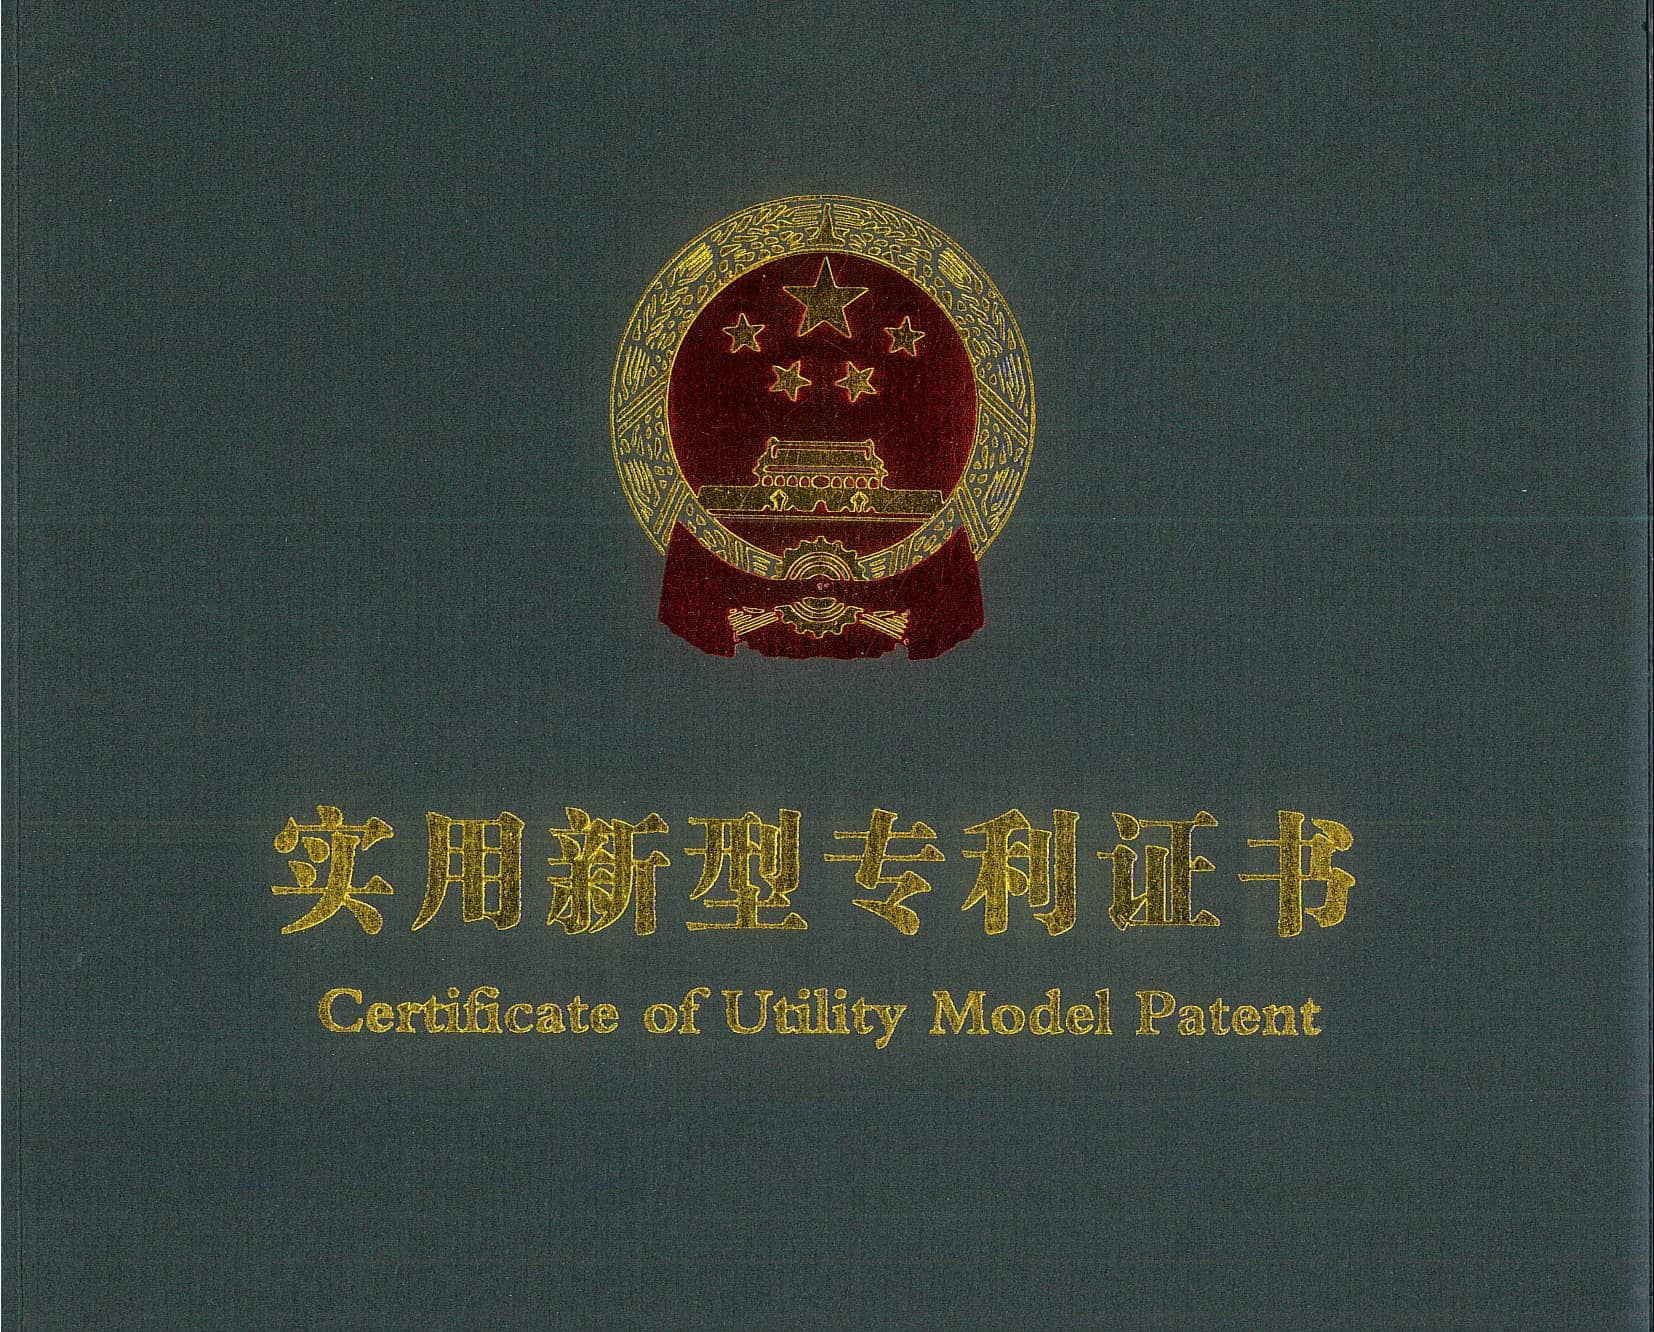 Obtained 8 patent model certificates issued by China Intellectual Property Bureau.